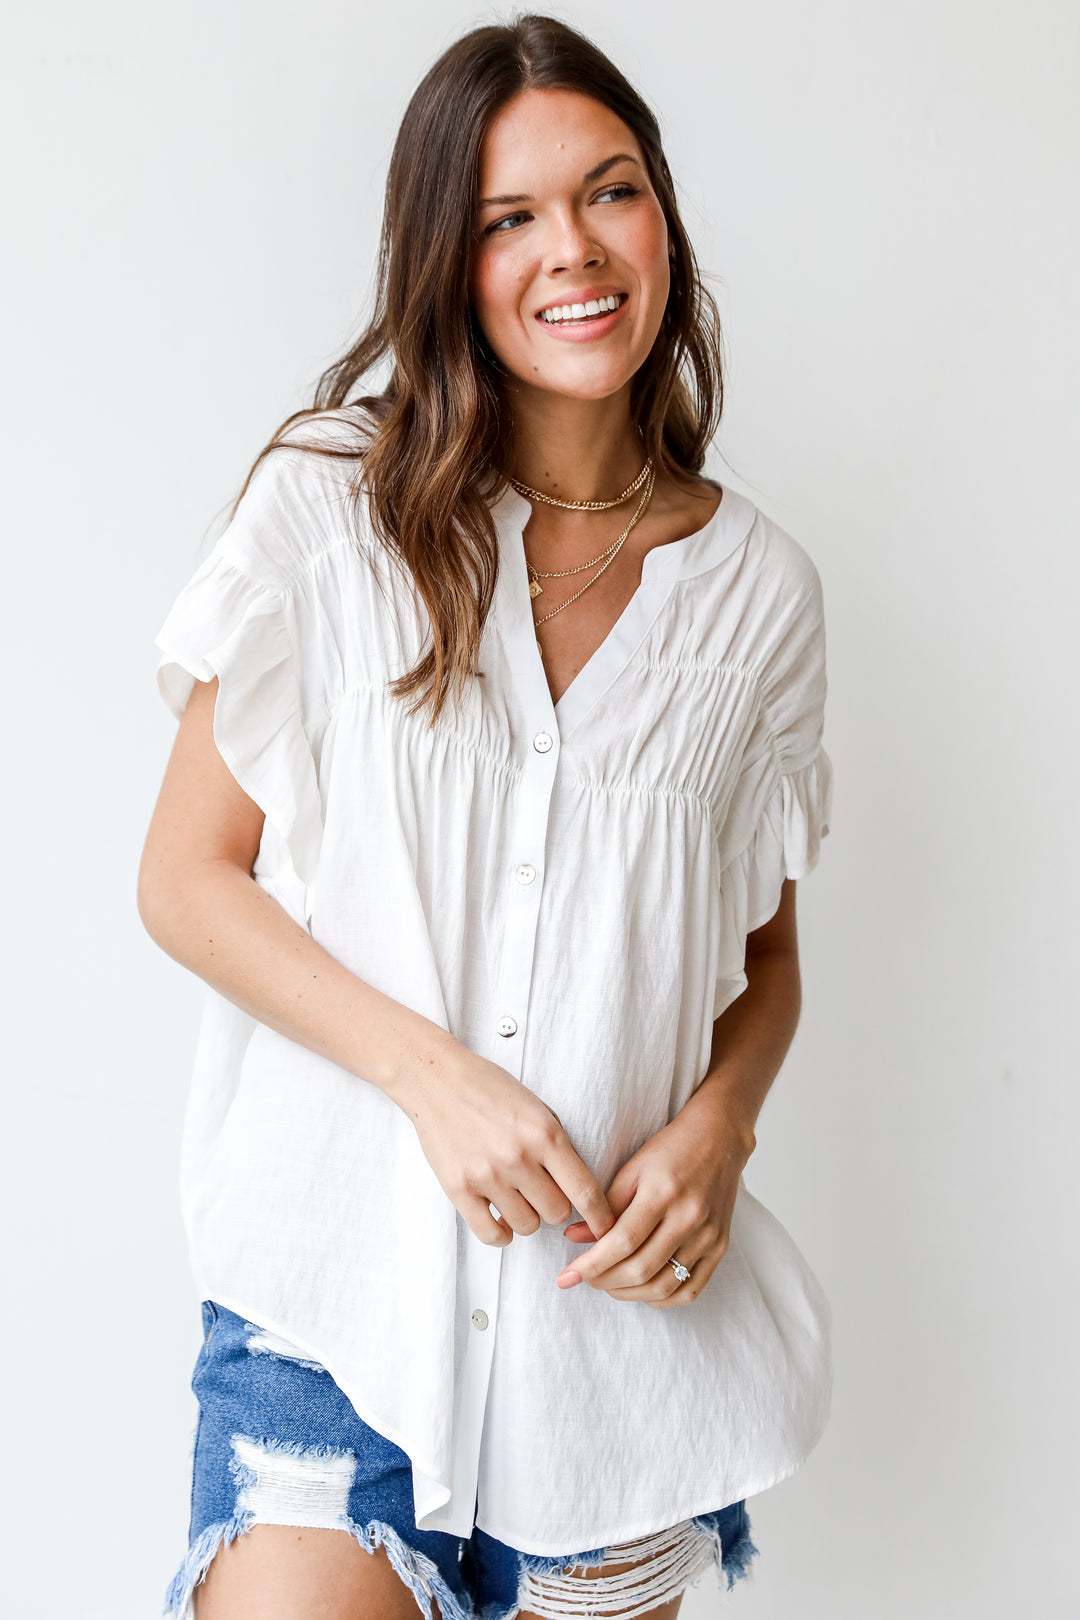 Ruffle Blouse in white front view